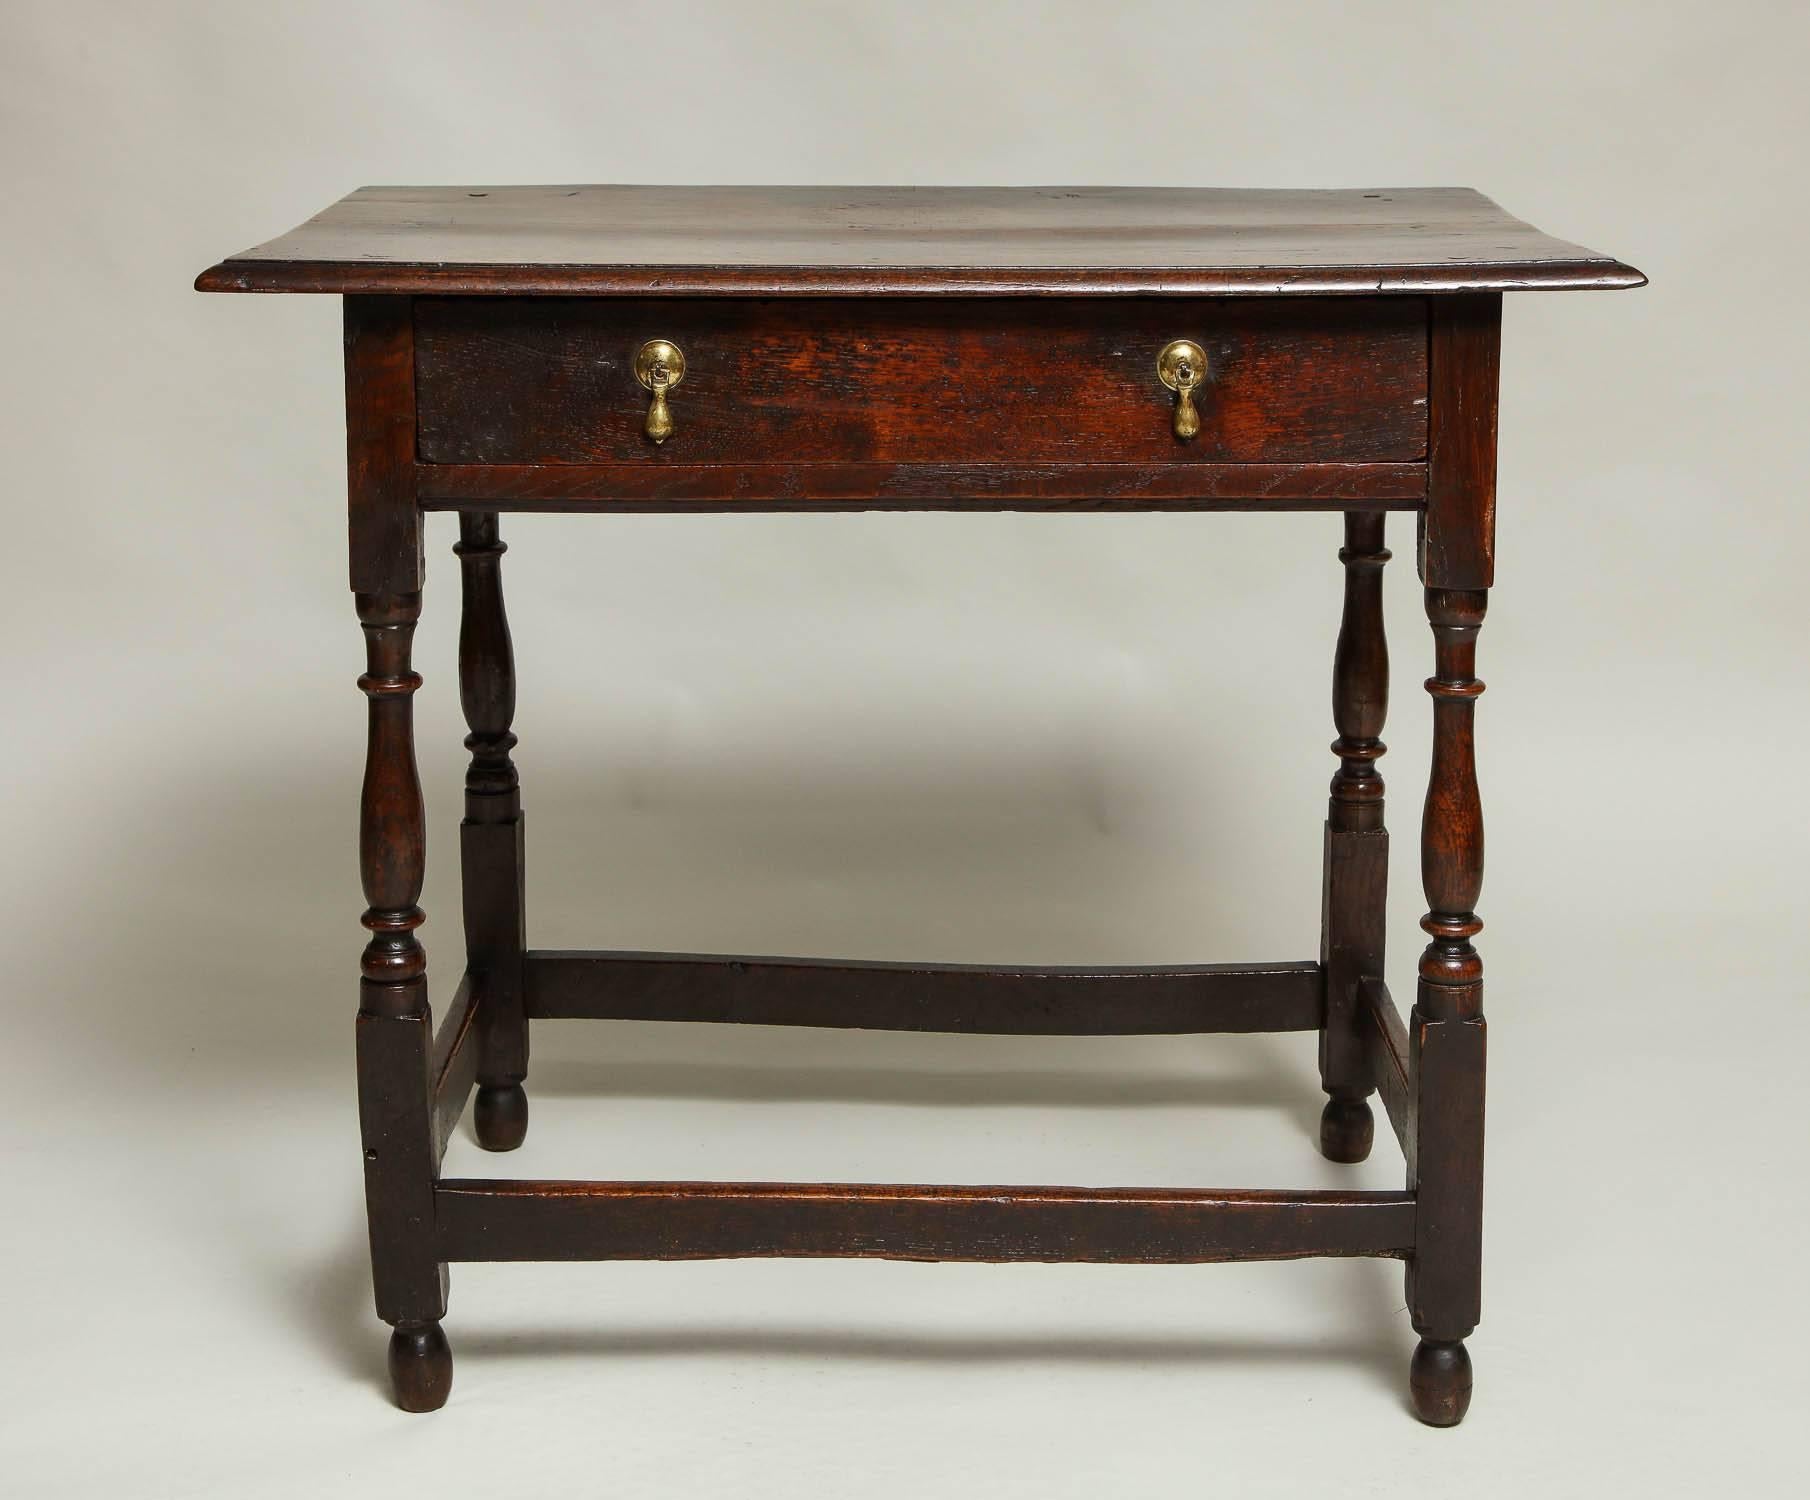 Queen Anne period English oak side table having a richly patinated thumb molded top over single drawer with early teardrop pulls, over balustrade turned legs joined by box stretcher and standing proud on original turned feet. The whole with